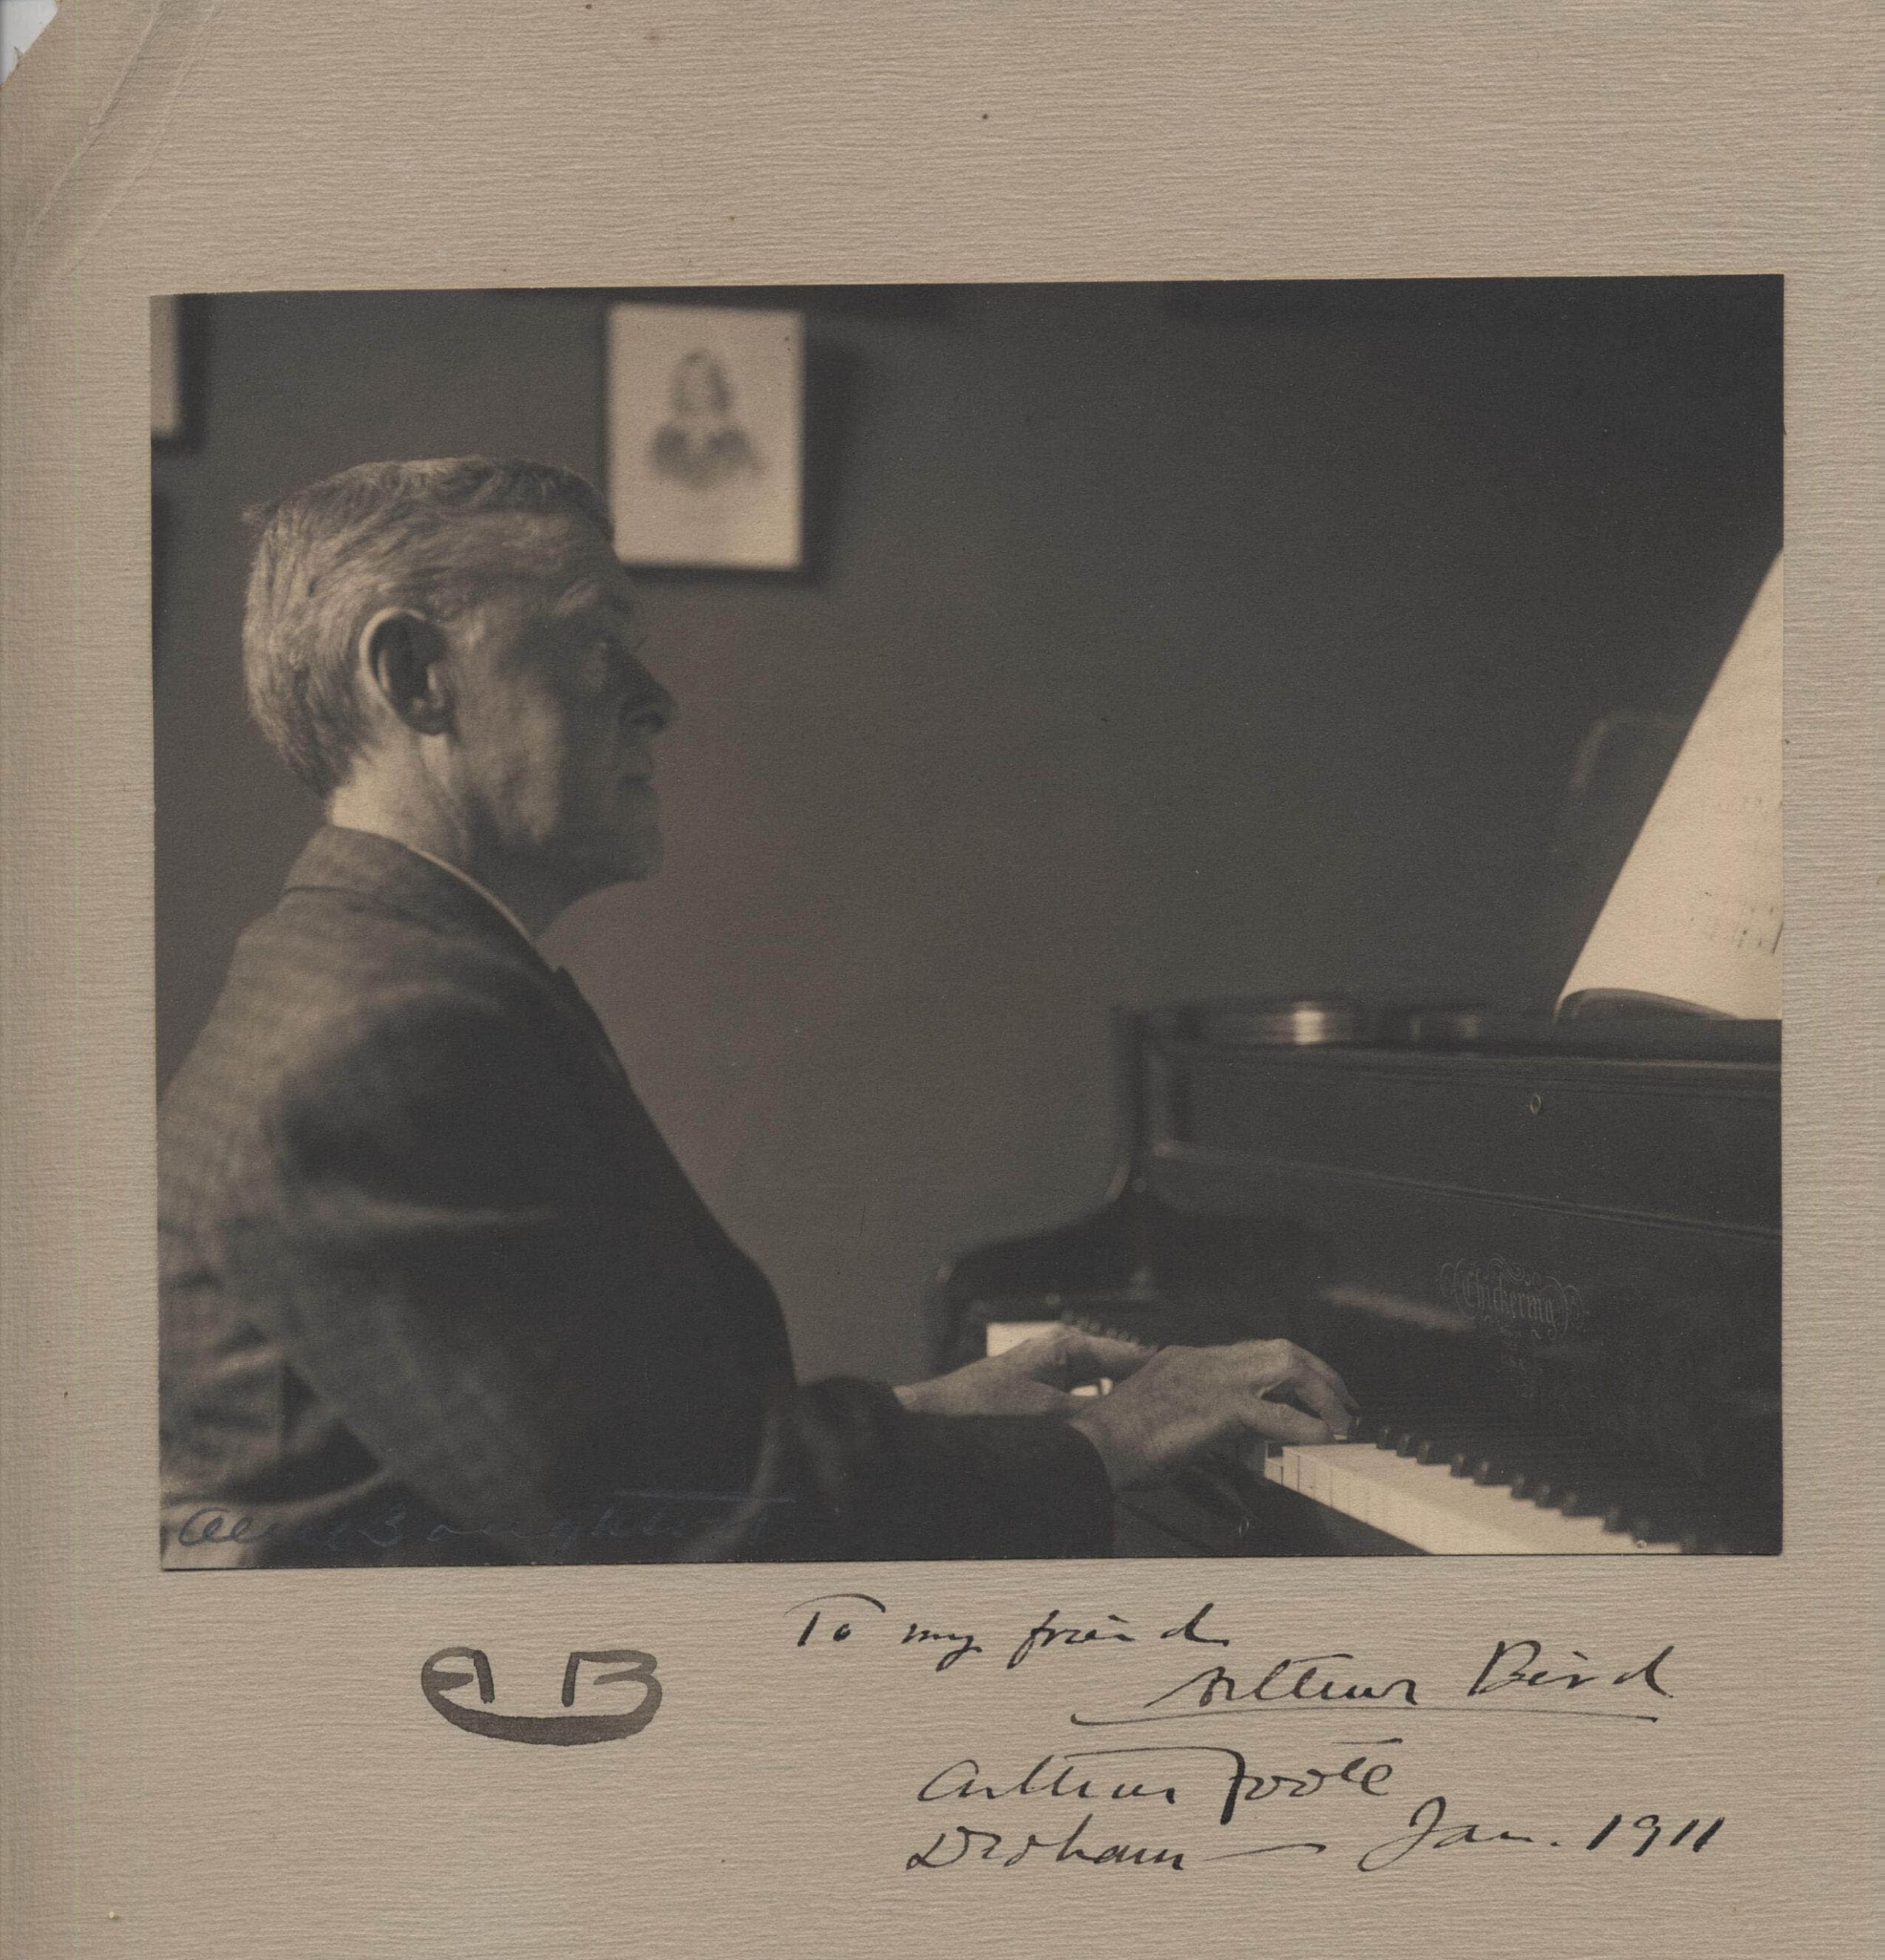 Former NEC faculty member, Arthur Foote, at the piano